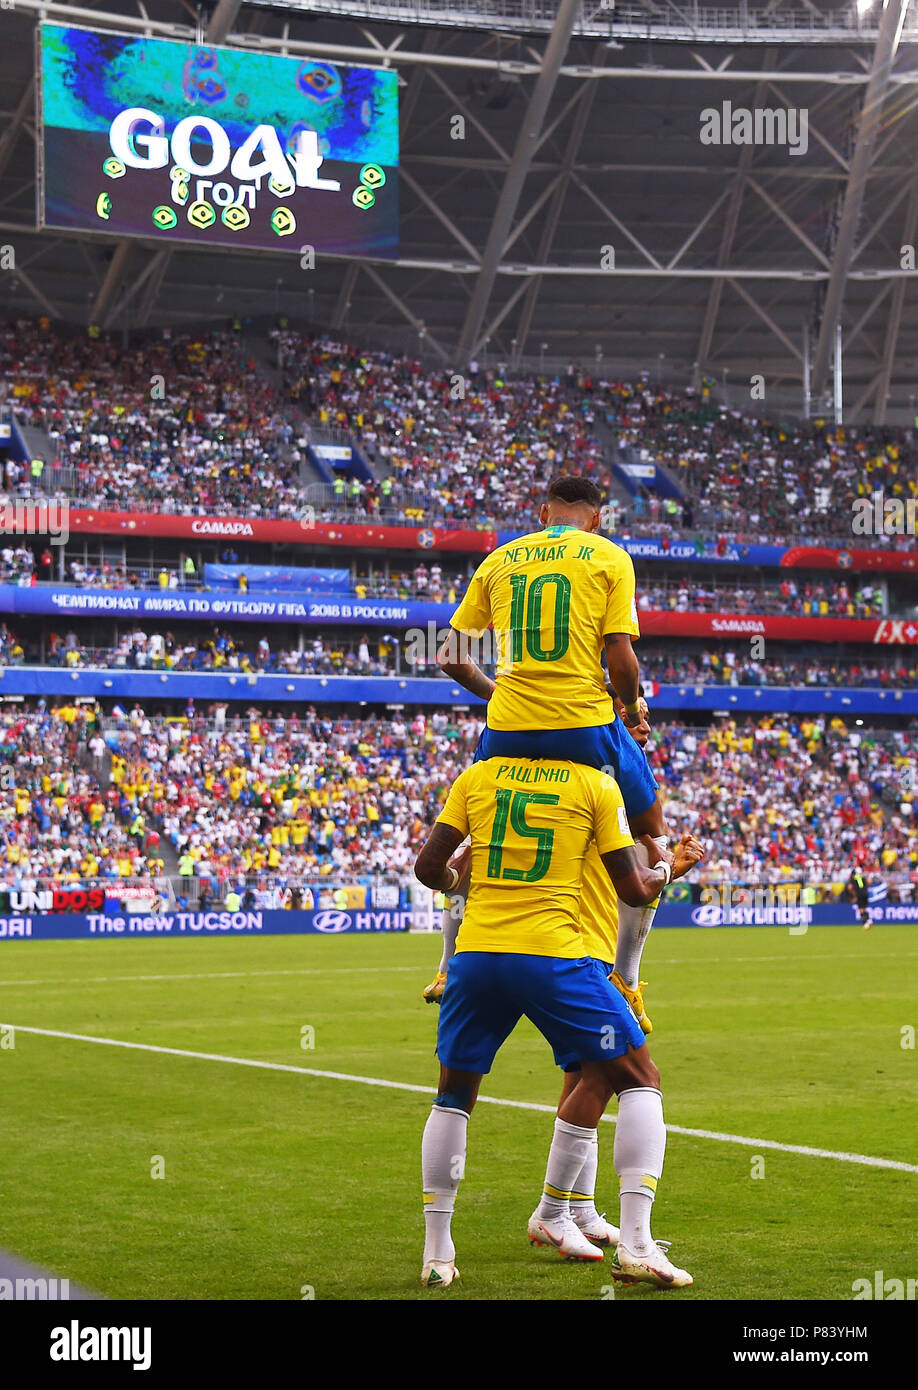 SAMARA, RUSSIA - JULY 02: Neymar and Paulinho of Brazil celebrate scoring a goal during the 2018 FIFA World Cup Russia Round of 16 match between Brazil and Mexico at Samara Arena on July 2, 2018 in Samara, Russia. (Photo by Lukasz Laskowski/PressFocus/MB Media) Stock Photo